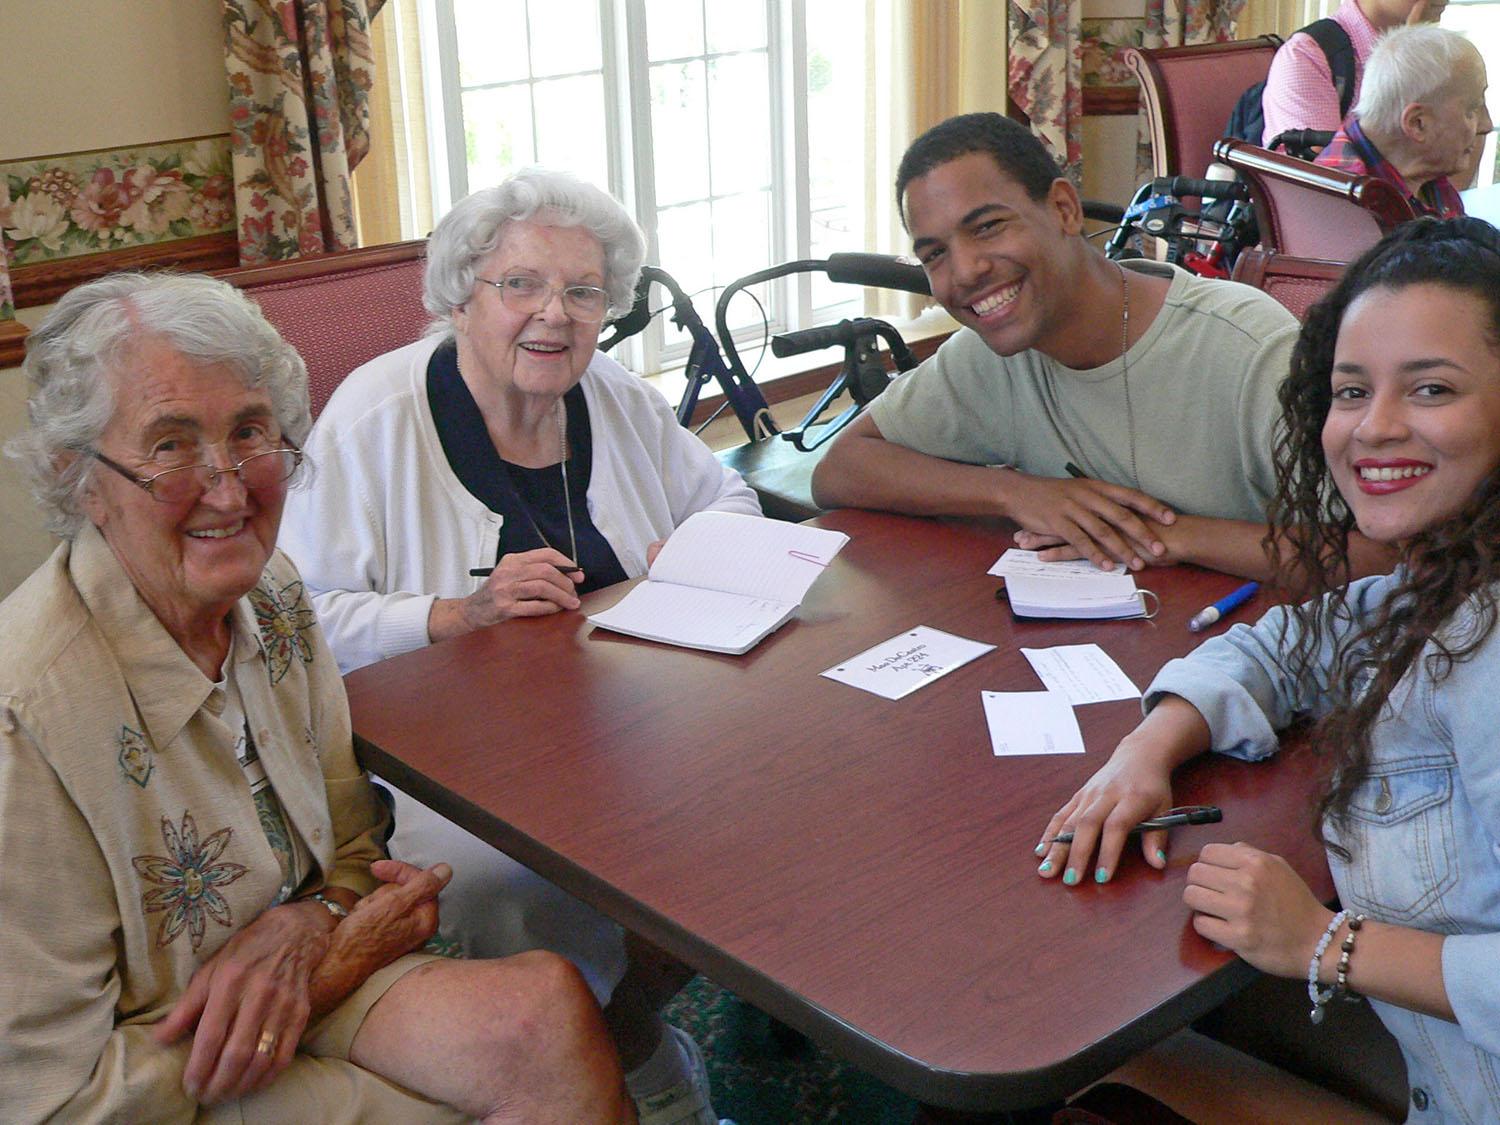 Participants in SUNY Oswego’s summer English Immersion Program made a visit to Bishop’s Commons in Oswego for a chance to practice their language skills while enjoying an afternoon of getting to know local seniors.